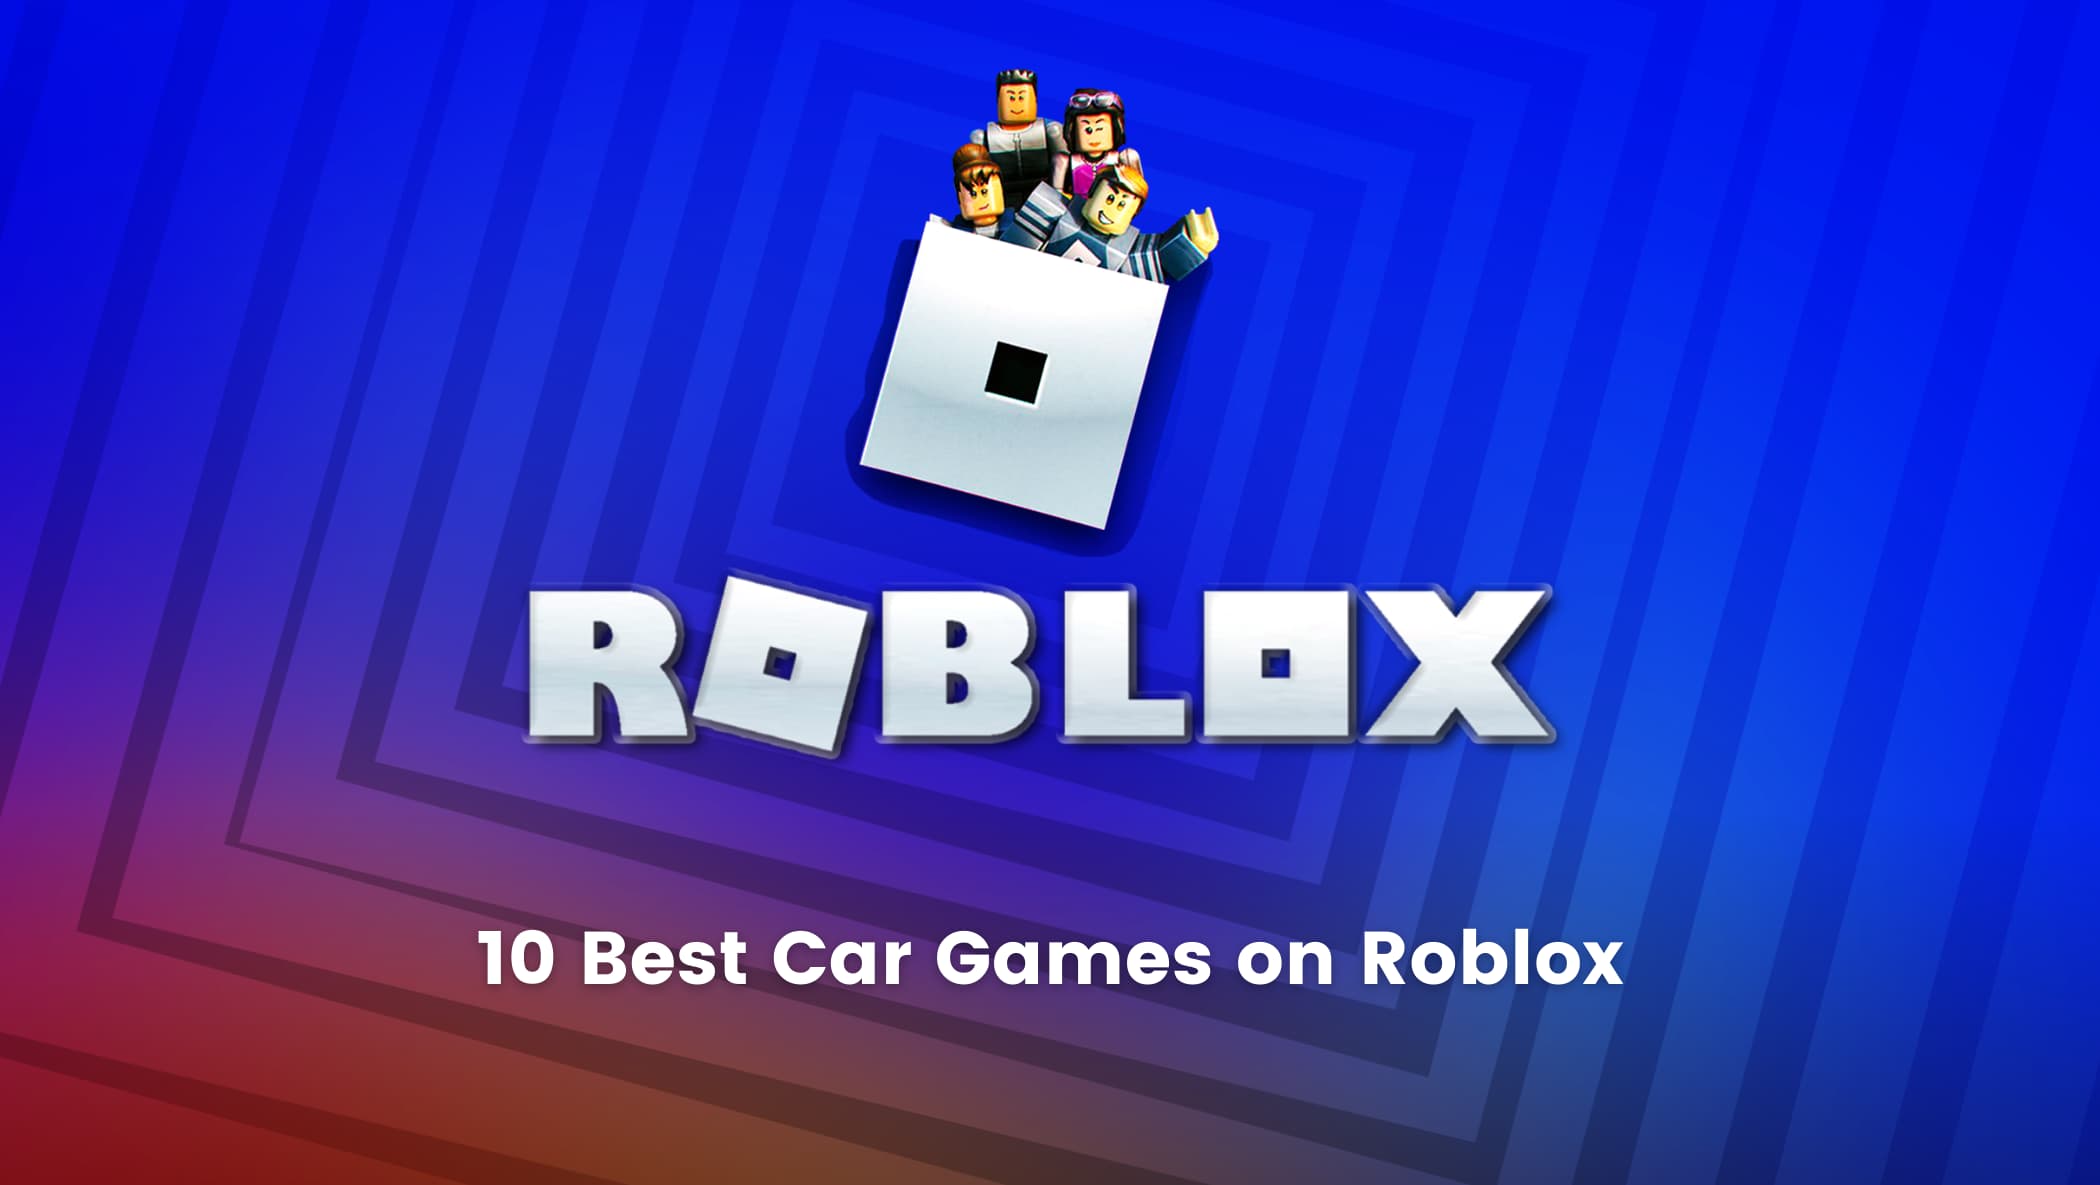 Roblox on X: My Games lets you & your friends play YOUR own ROBLOX game on  the Xbox One! Check it out!    / X